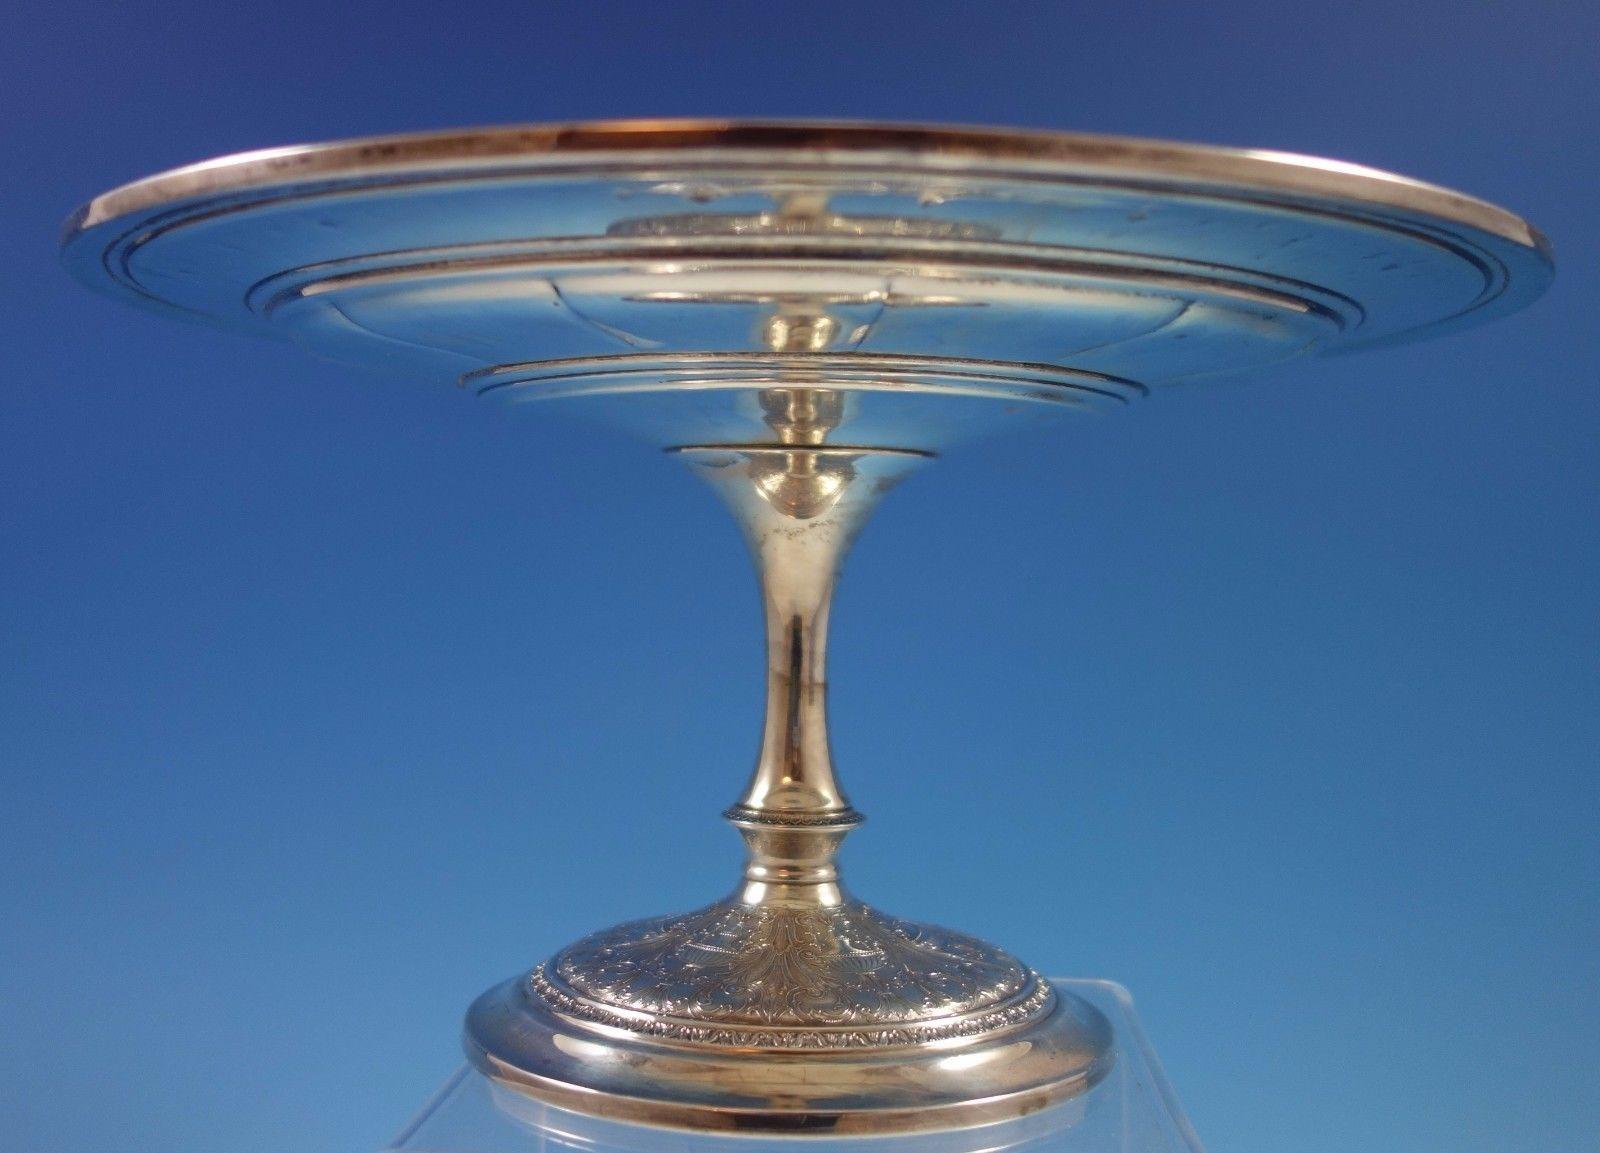 Wedgwood by International sterling silver large fluted compote with fancy design on the base. The piece is marked with #T41-1, it measures 5 3/8